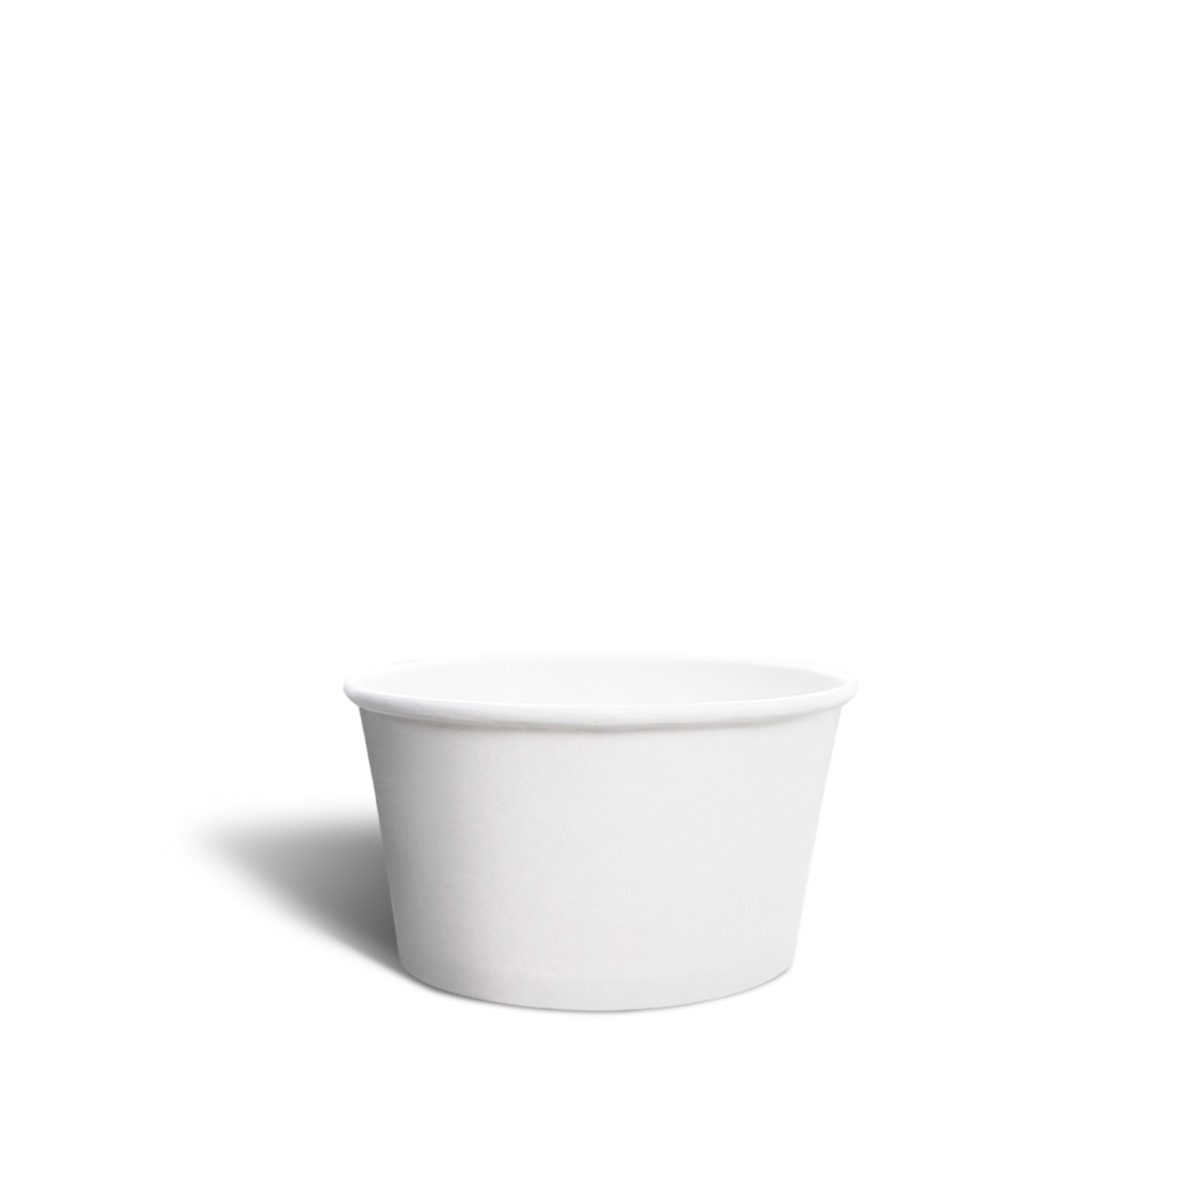 https://affinity.supply/wp-content/uploads/2020/09/12oz-paper-soup-bowl-white.jpg